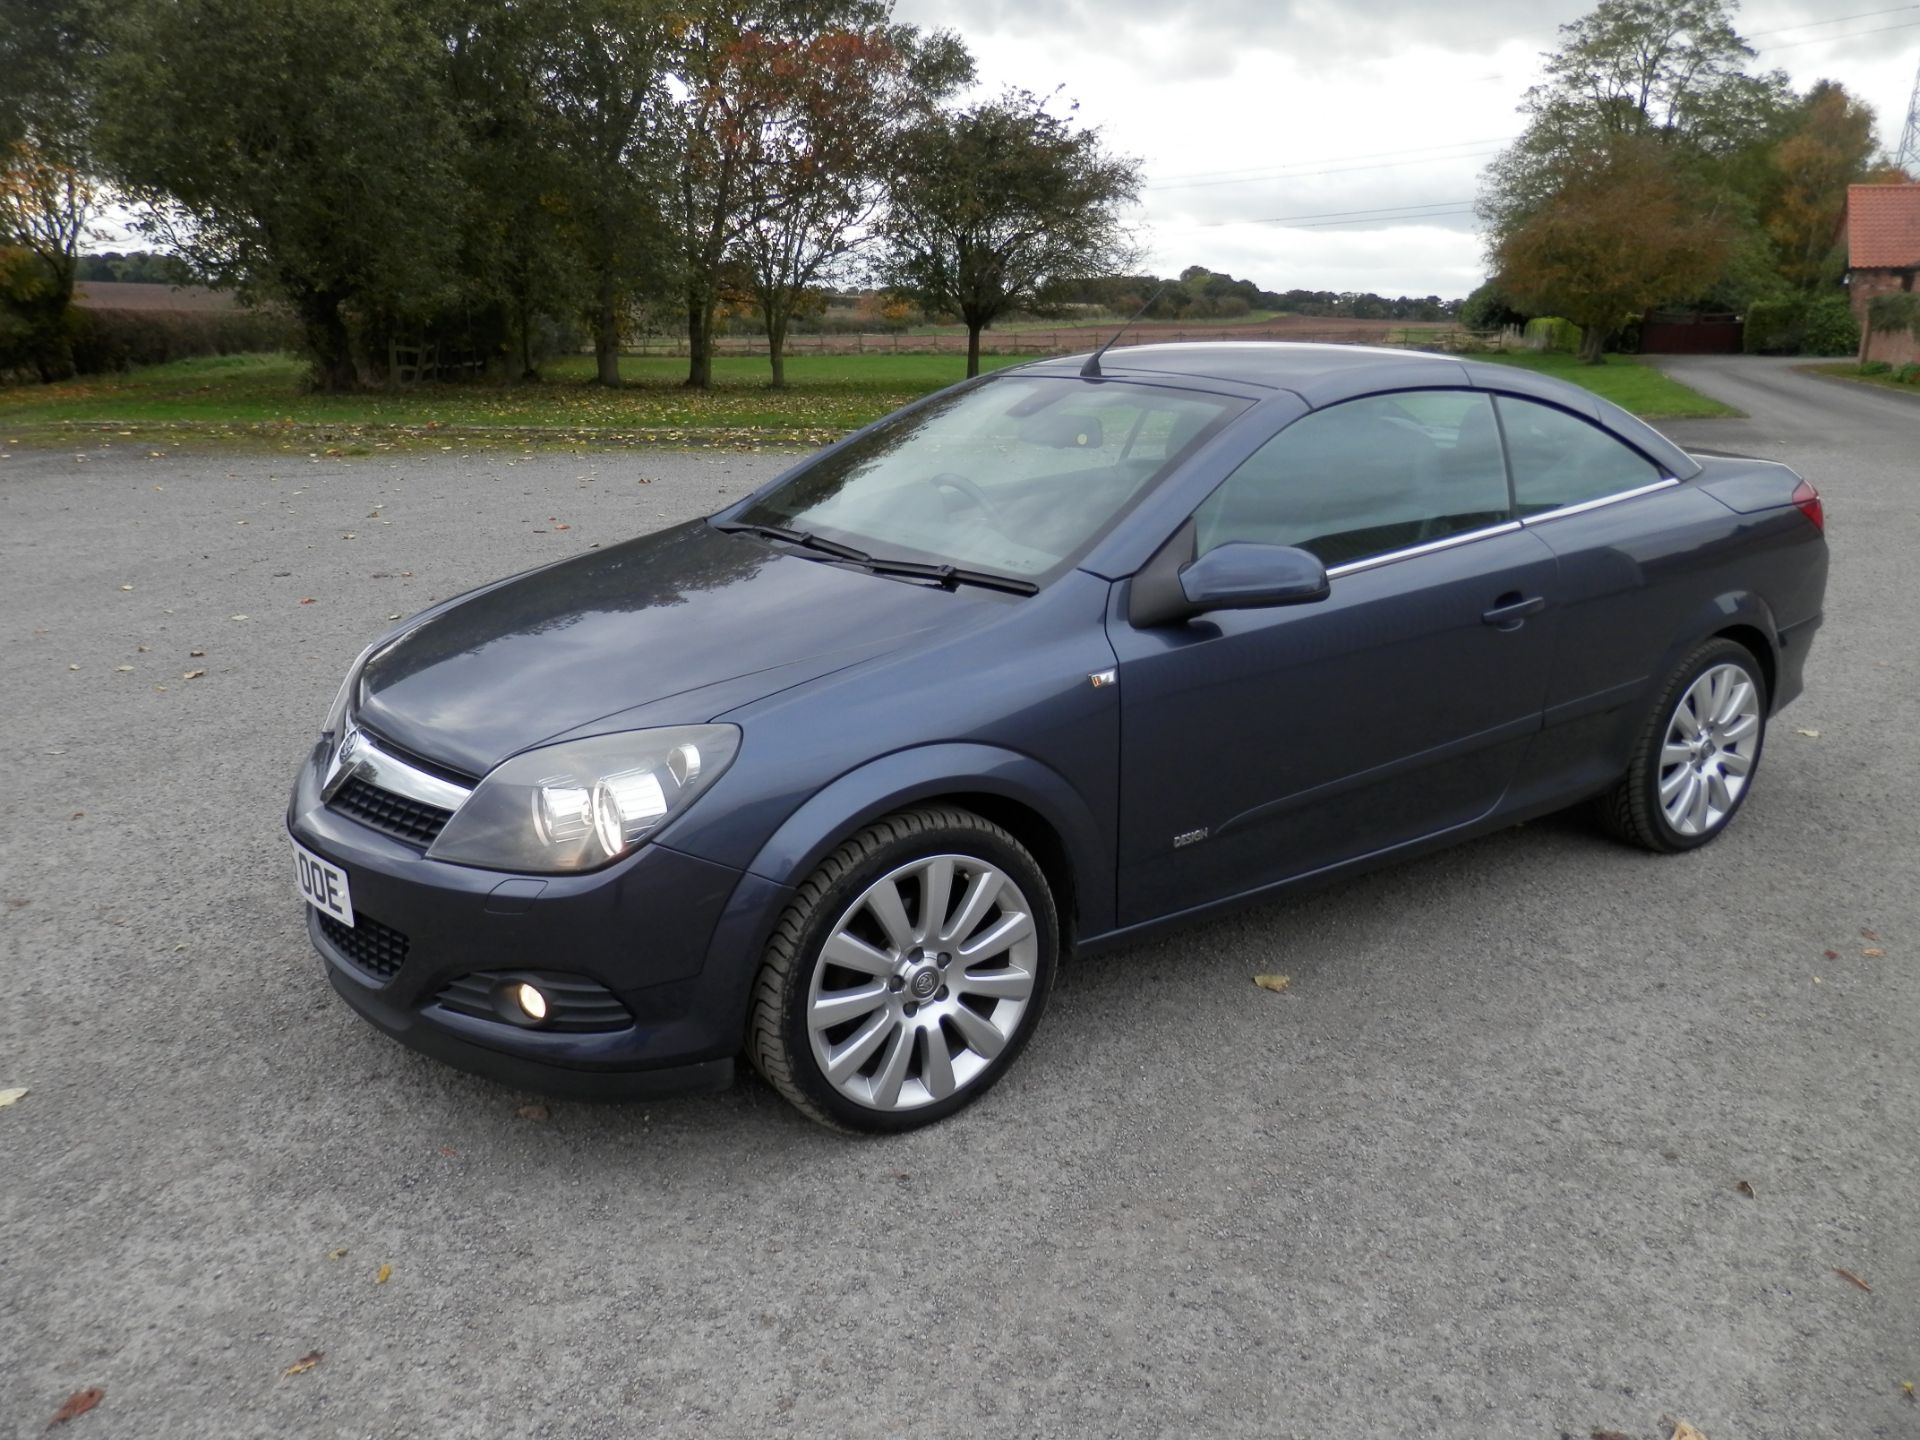 2006/06 VAUXHALL ASTRA DESIGN 1.8 SPORT TWIN TOP CONVERTIBLE, ONLY 62K MILES WARRANTED, MOT FEB 2017 - Image 3 of 25